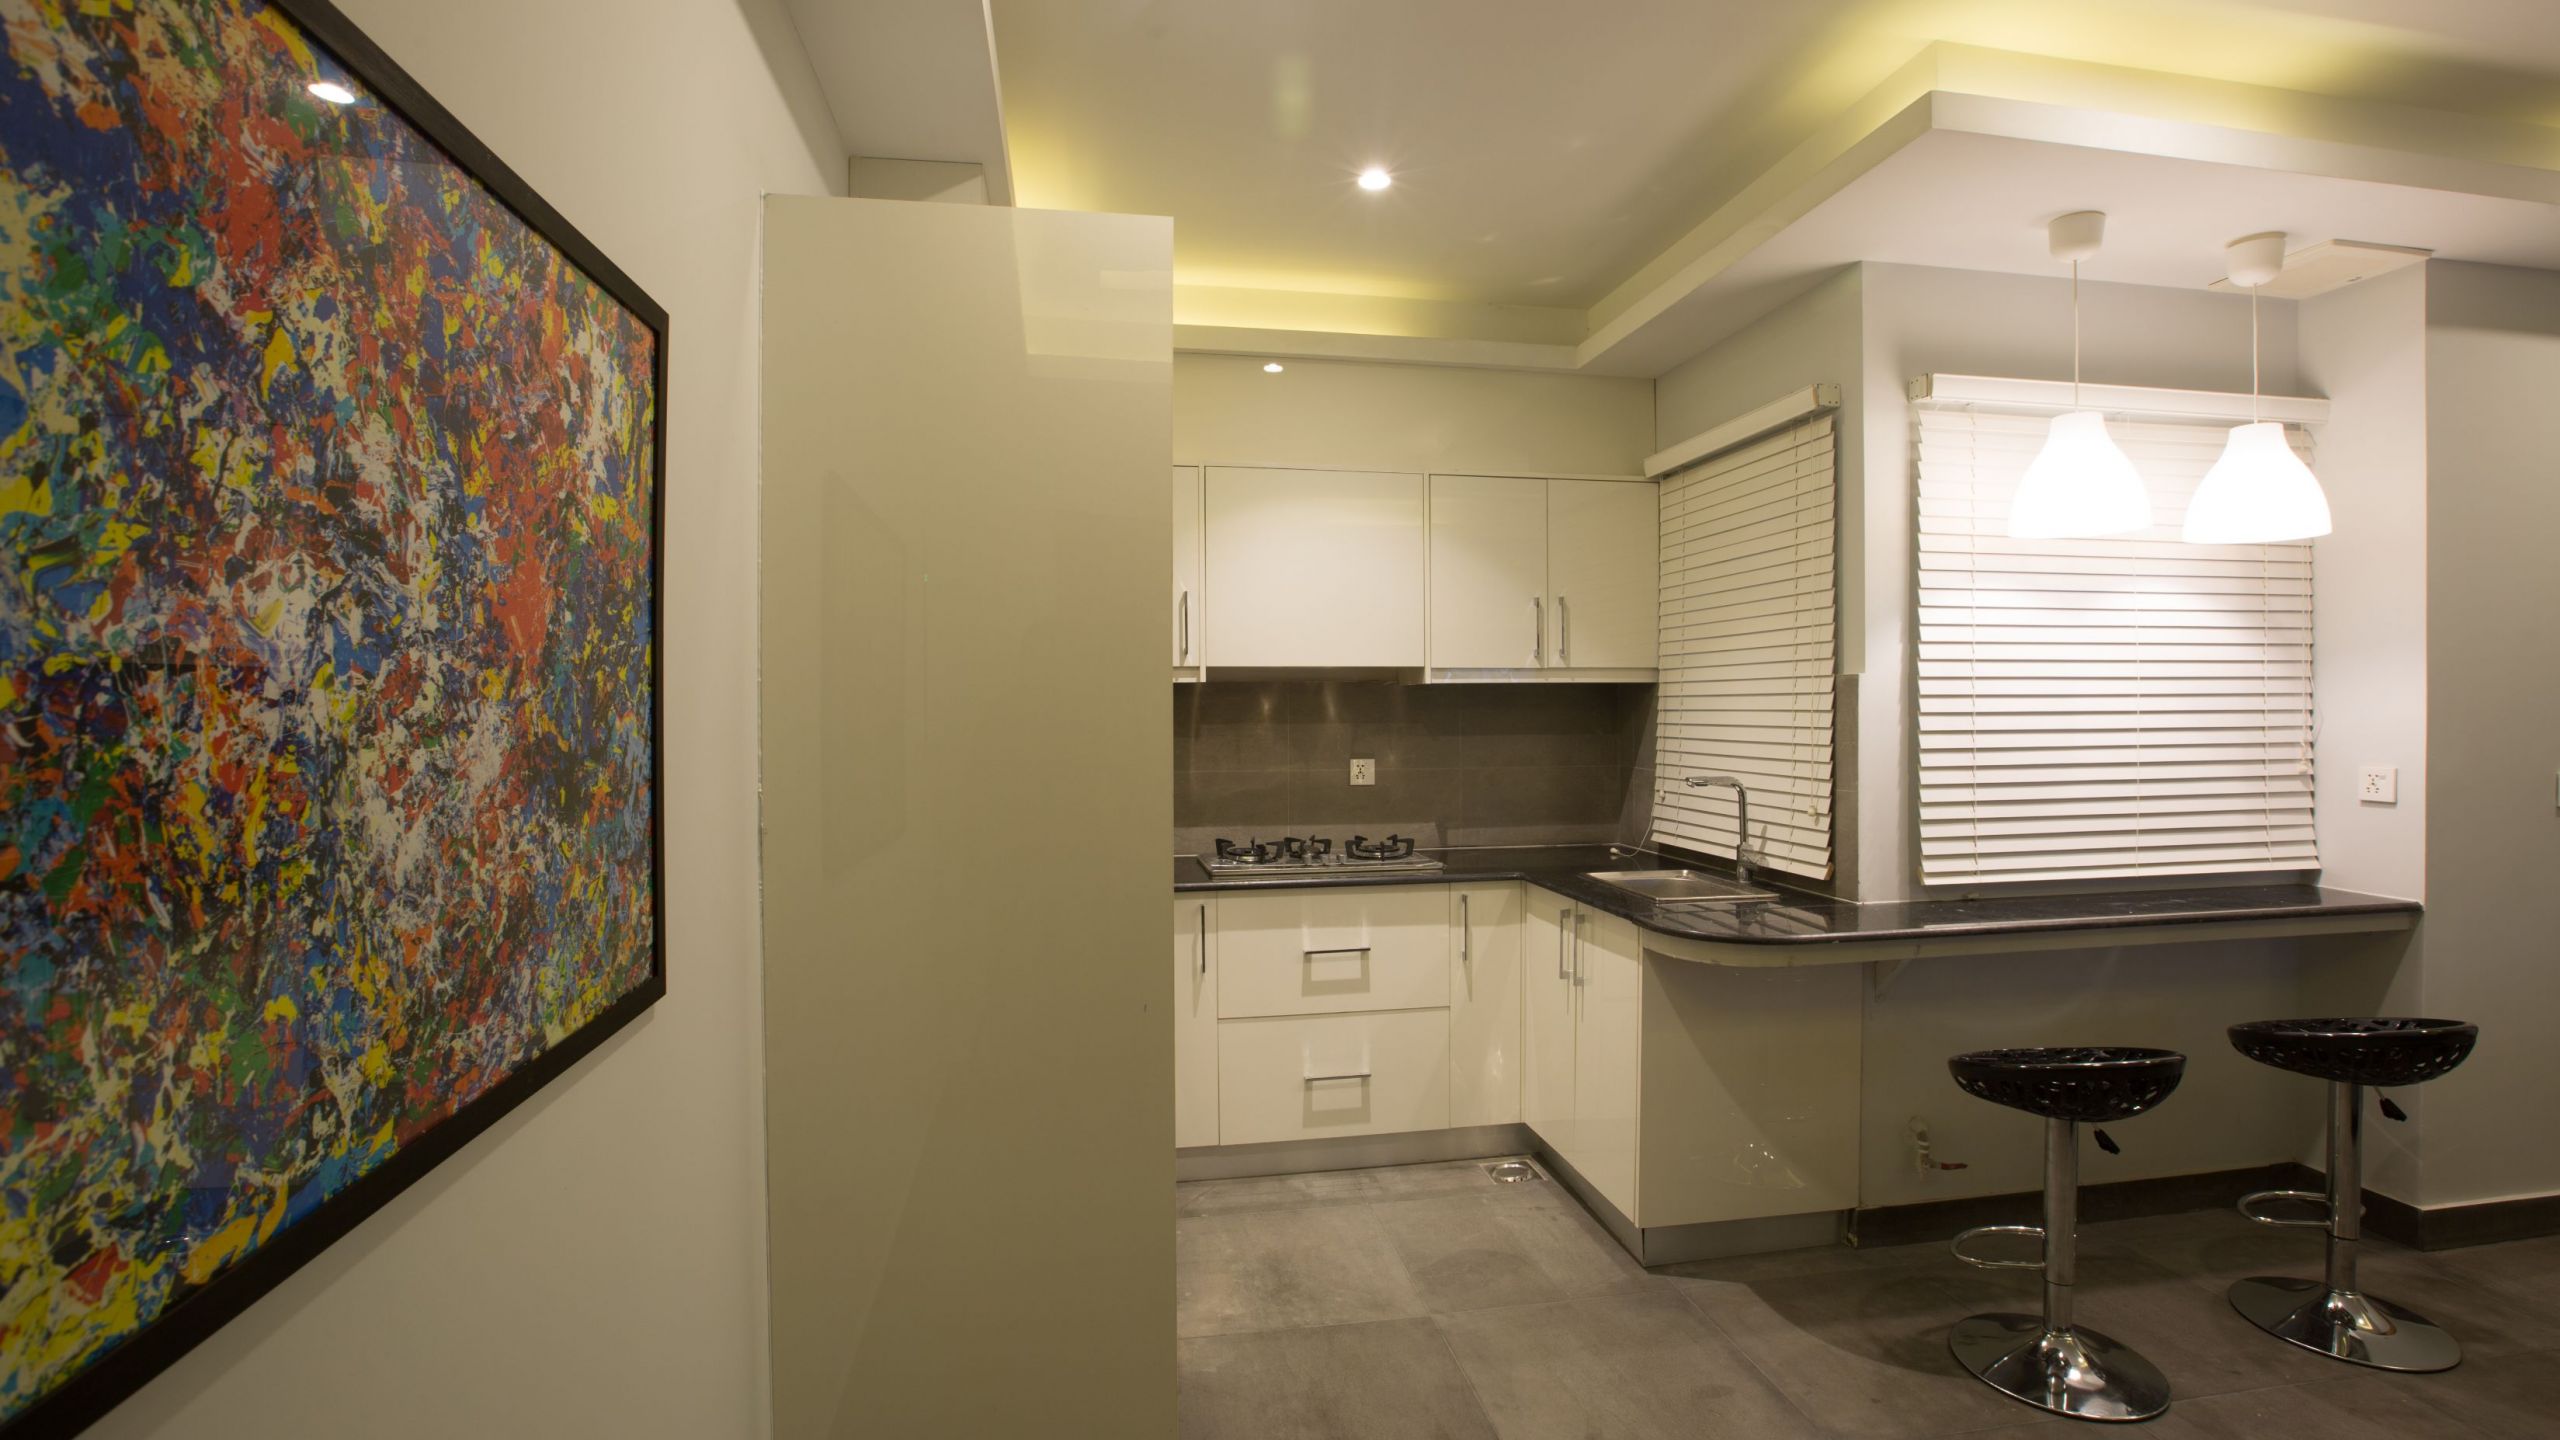 Deluxe suite has the facilities and amenities of split Ac, modernized kitchen.